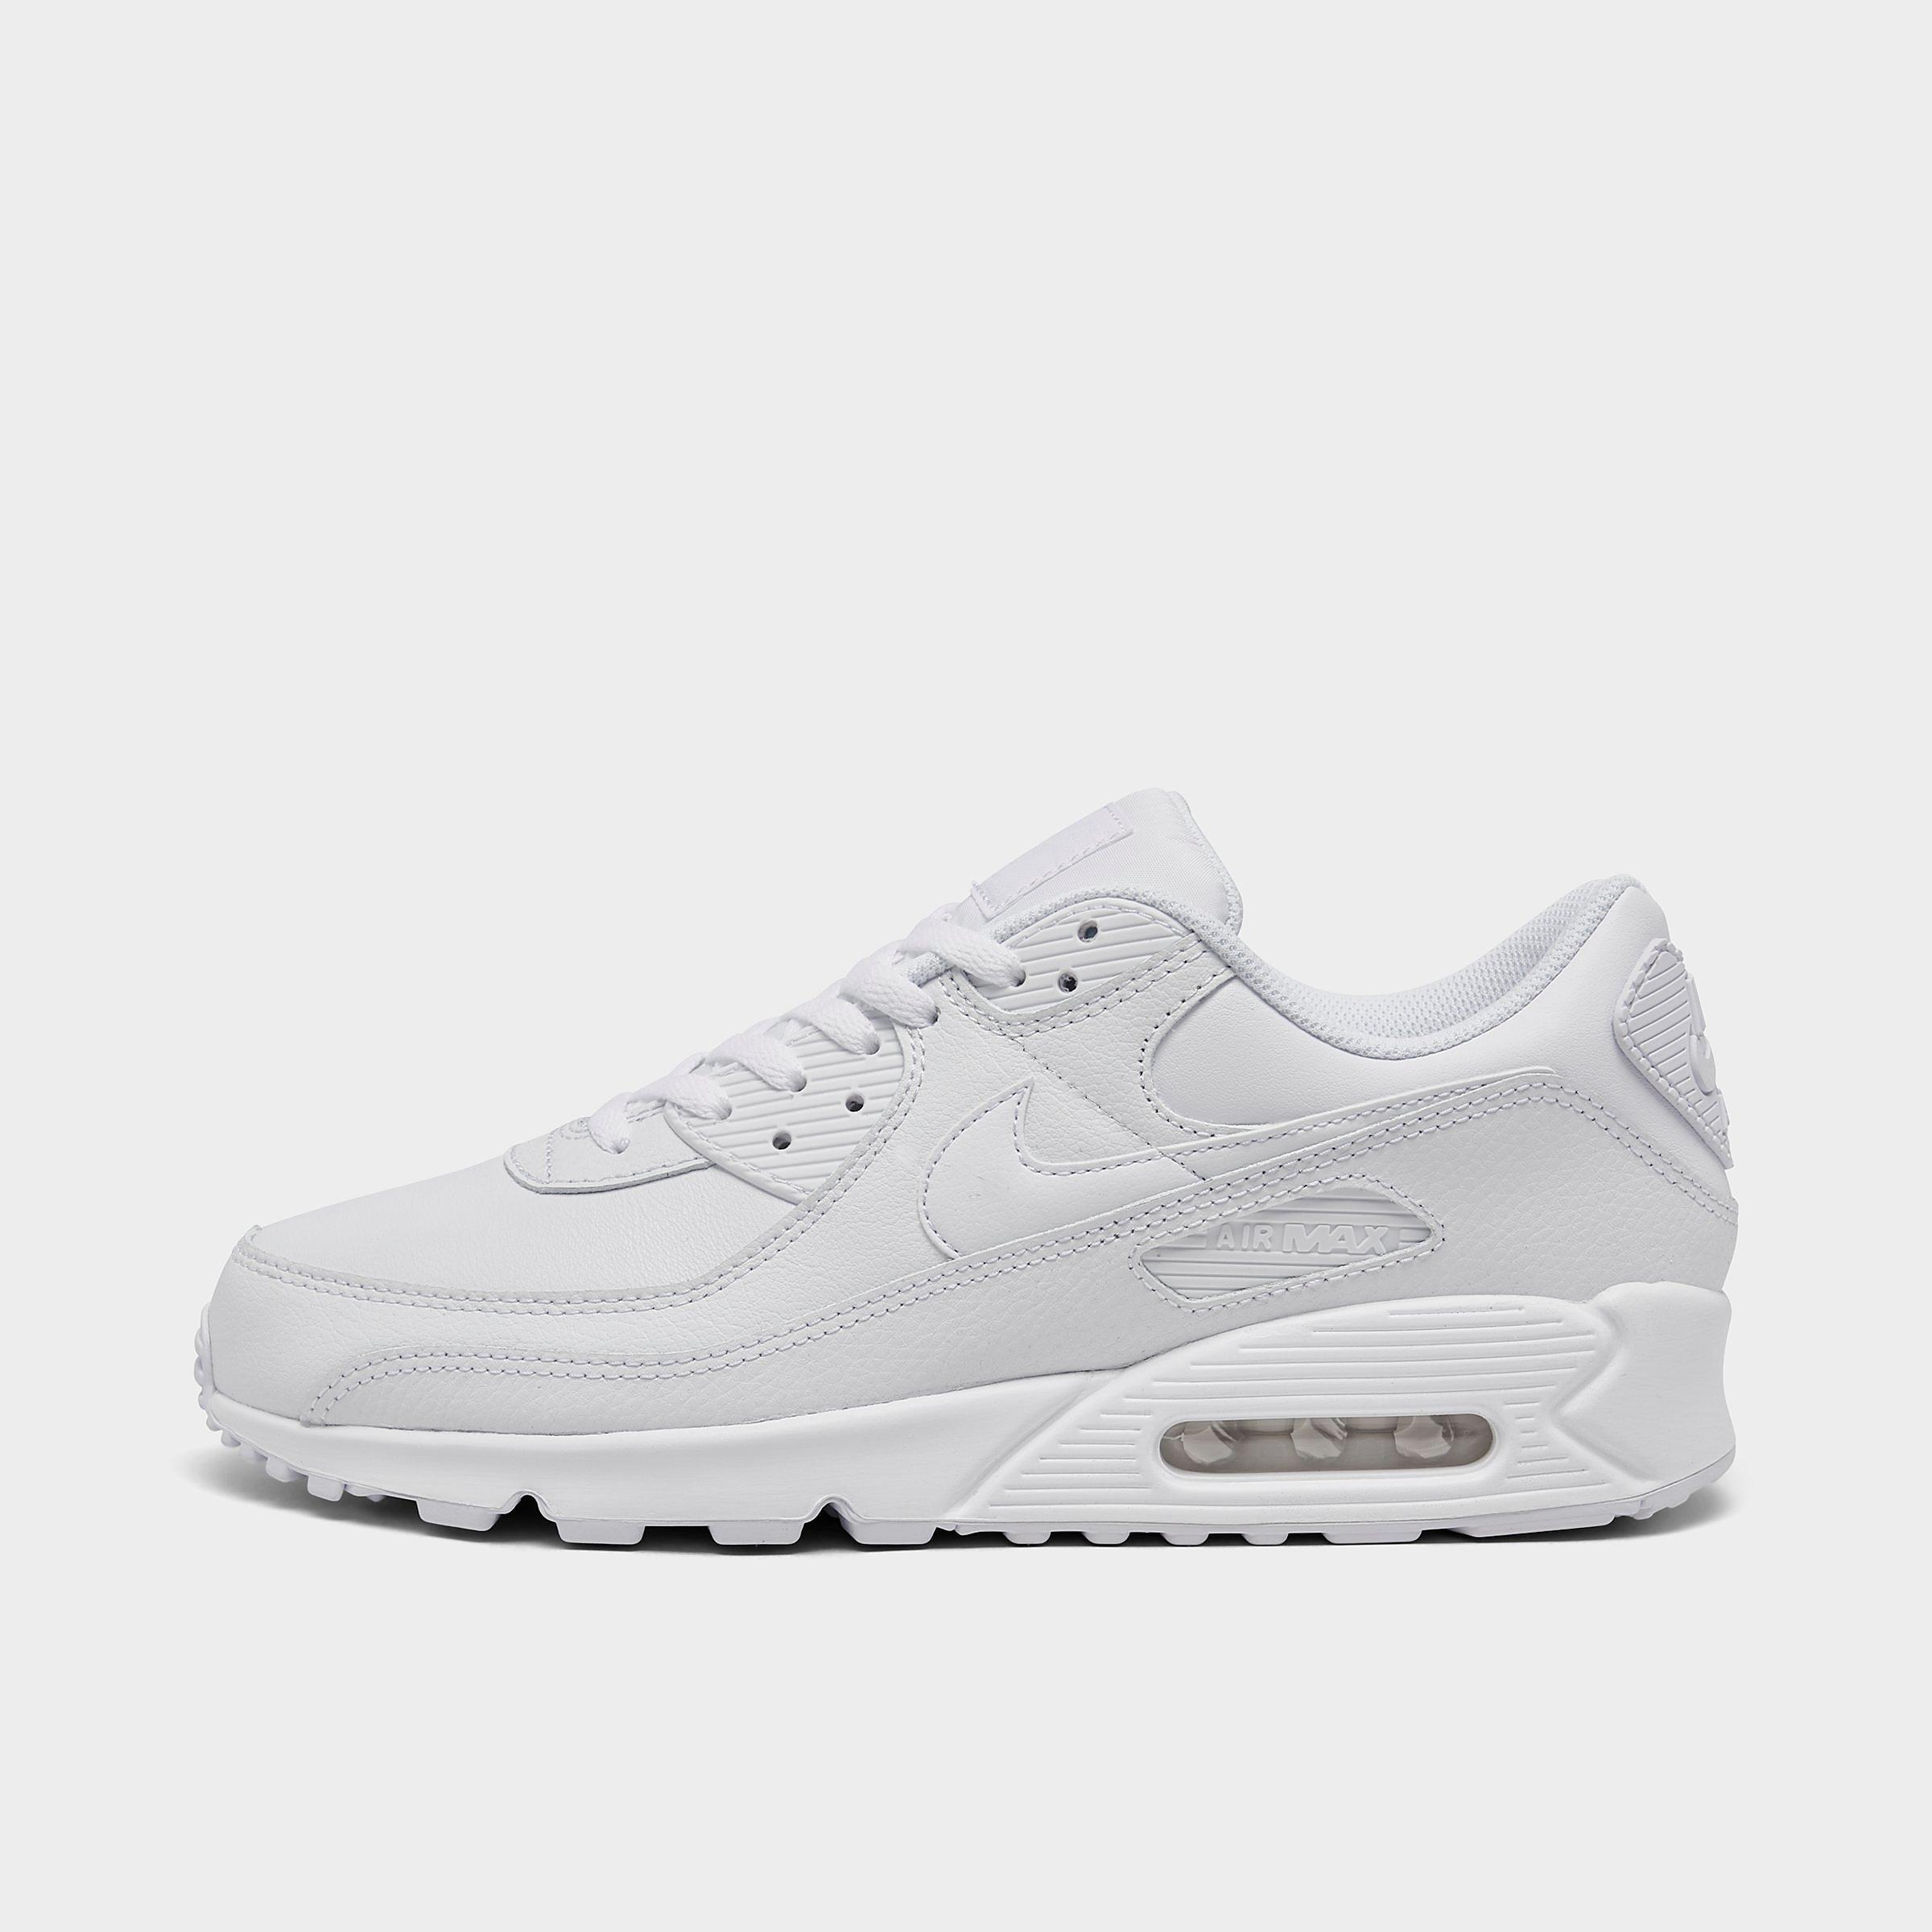 Mens Nike Air Max 90 Leather Casual Shoes